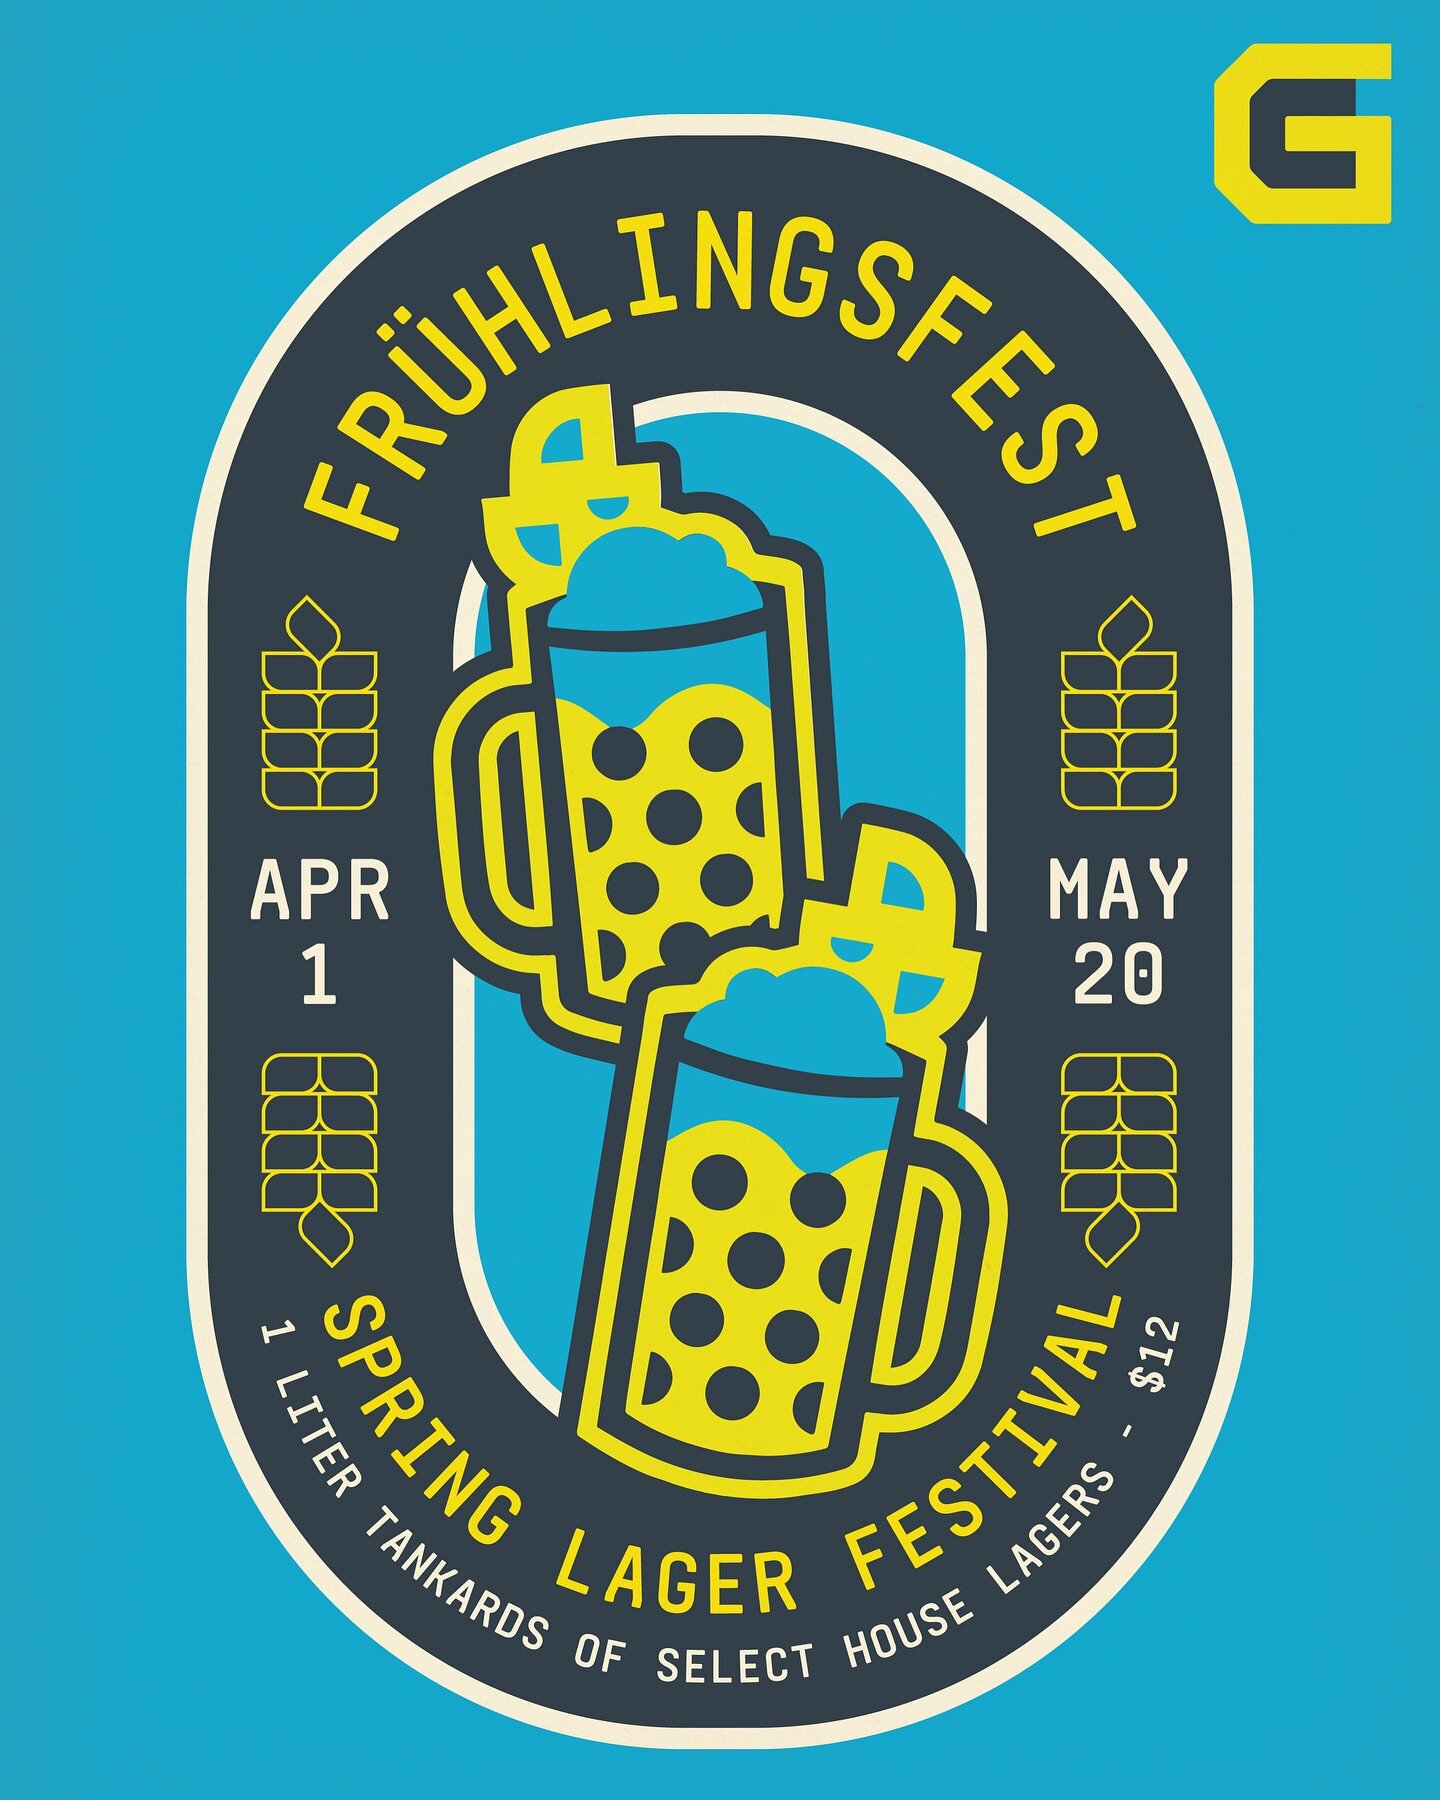 🌸🍻 Dive into the spirit of spring at the Fr&uuml;hlingsfest: Spring Lager Festival! 🍻🌸 

From April 1 to May 20, join us at GameCraft Brewing Anaheim for a celebration of crispi brews. Indulge in Liters of select House Lagers for just $12! 🍺 

D